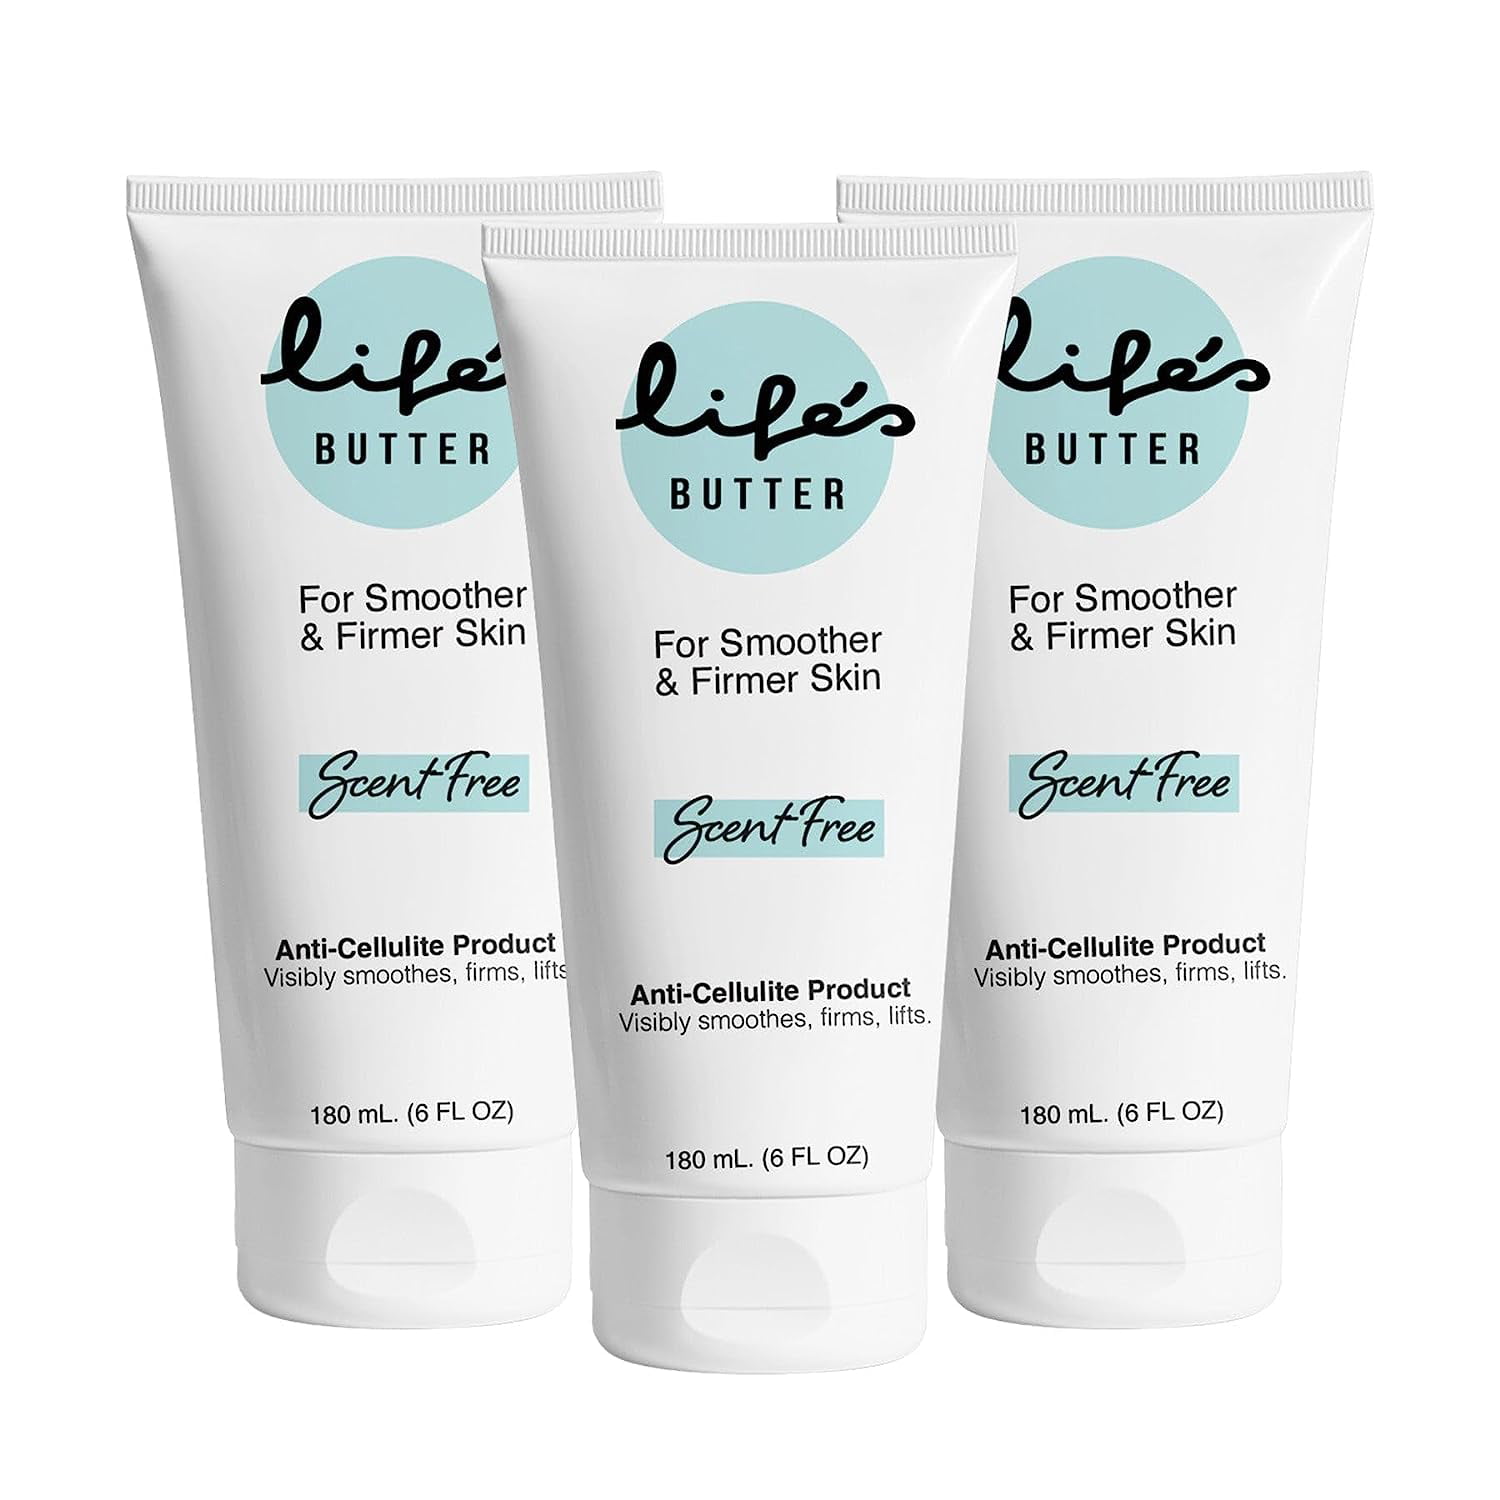 Life's Butter - Anti-Cellulite Cream (1 Pack)